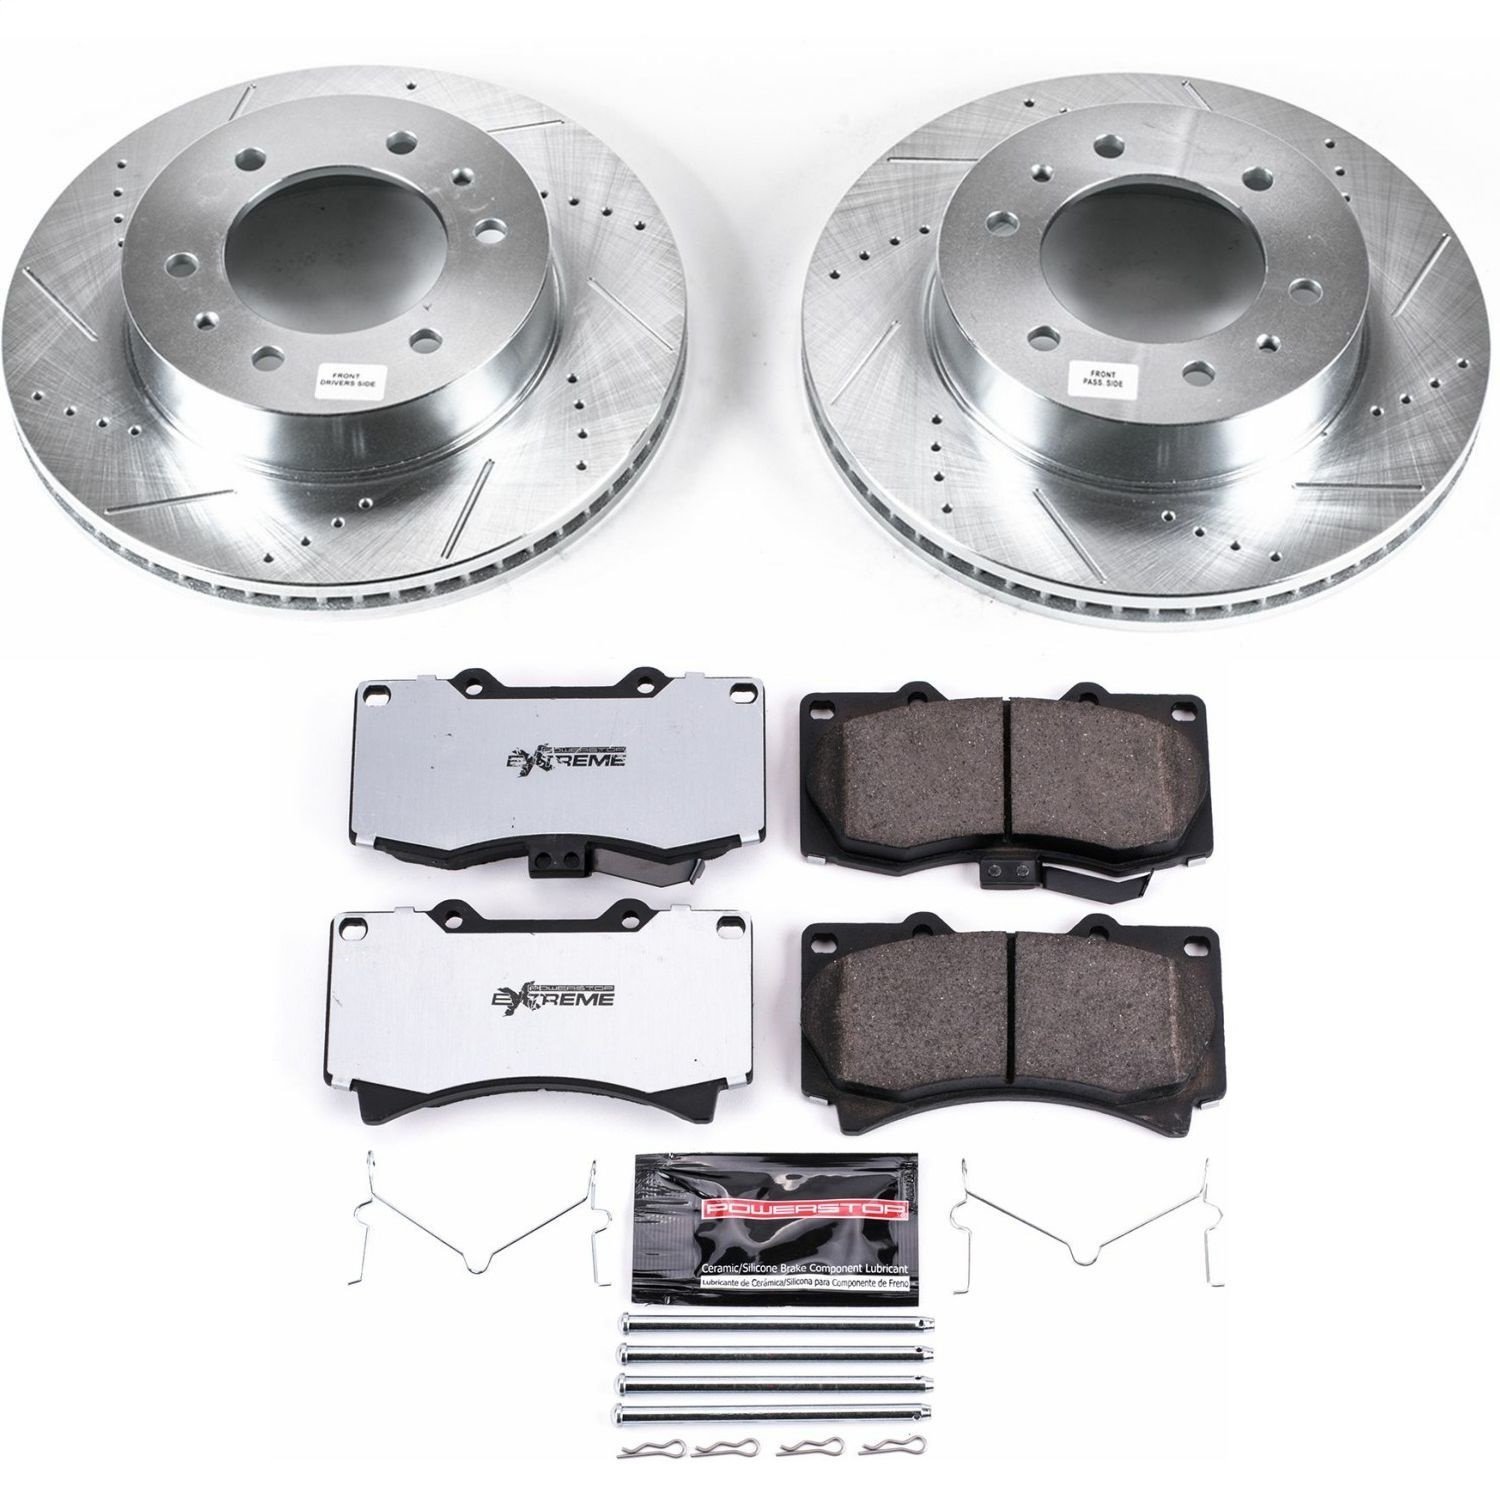 Z36 Front Brake Pads & Rotor Kit for Truck and Towing for 2006-2010 Hummer H3, H3T